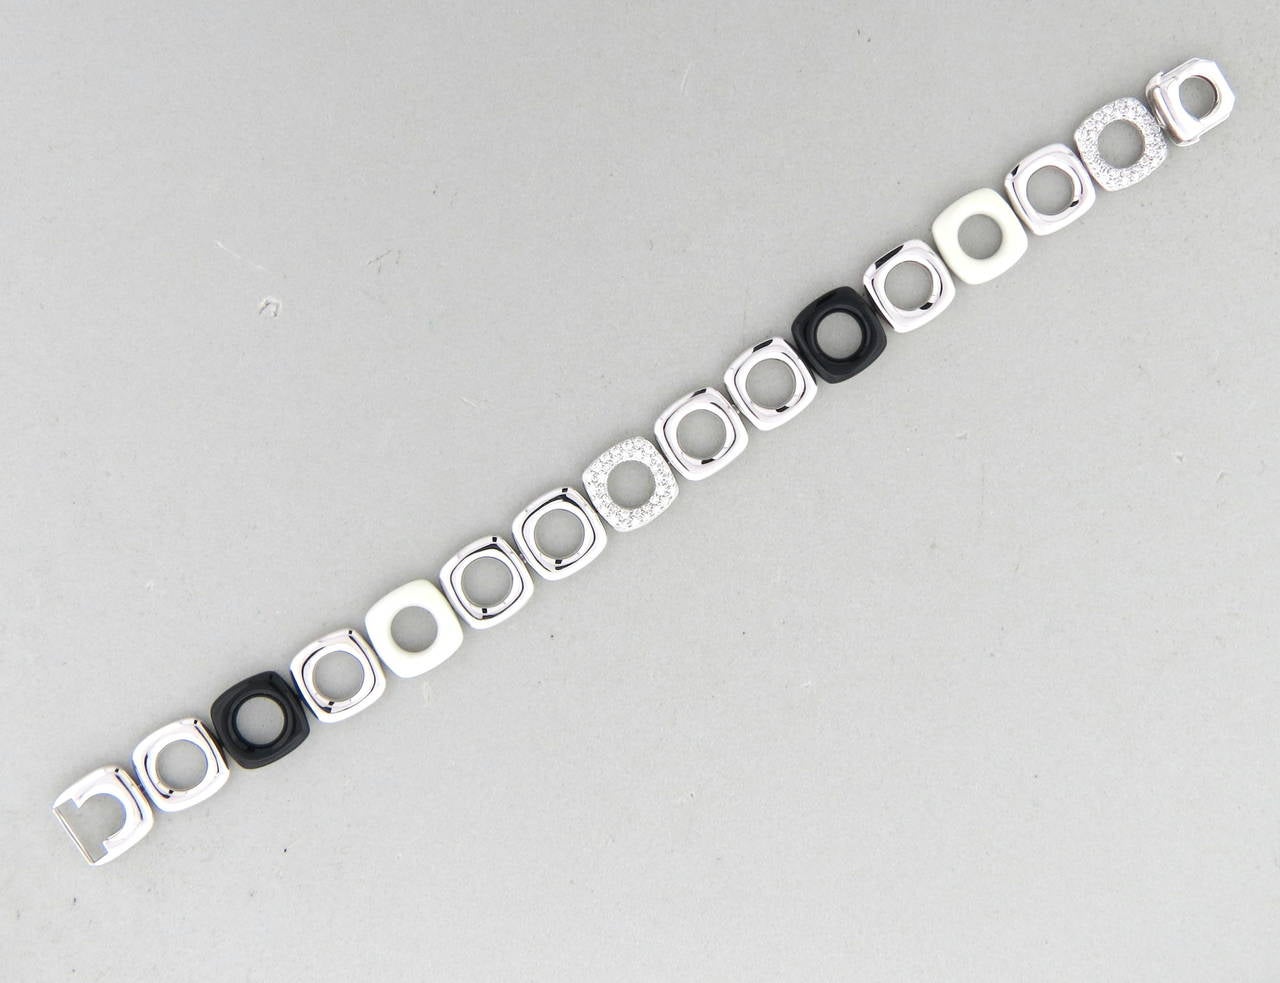 Tiffany & Co bracelet in 18k white gold, featuring diamond and white black hardstone links. Diamond weight is approx. 0.80ctw G/VS. Bracelet measures 7 1/4